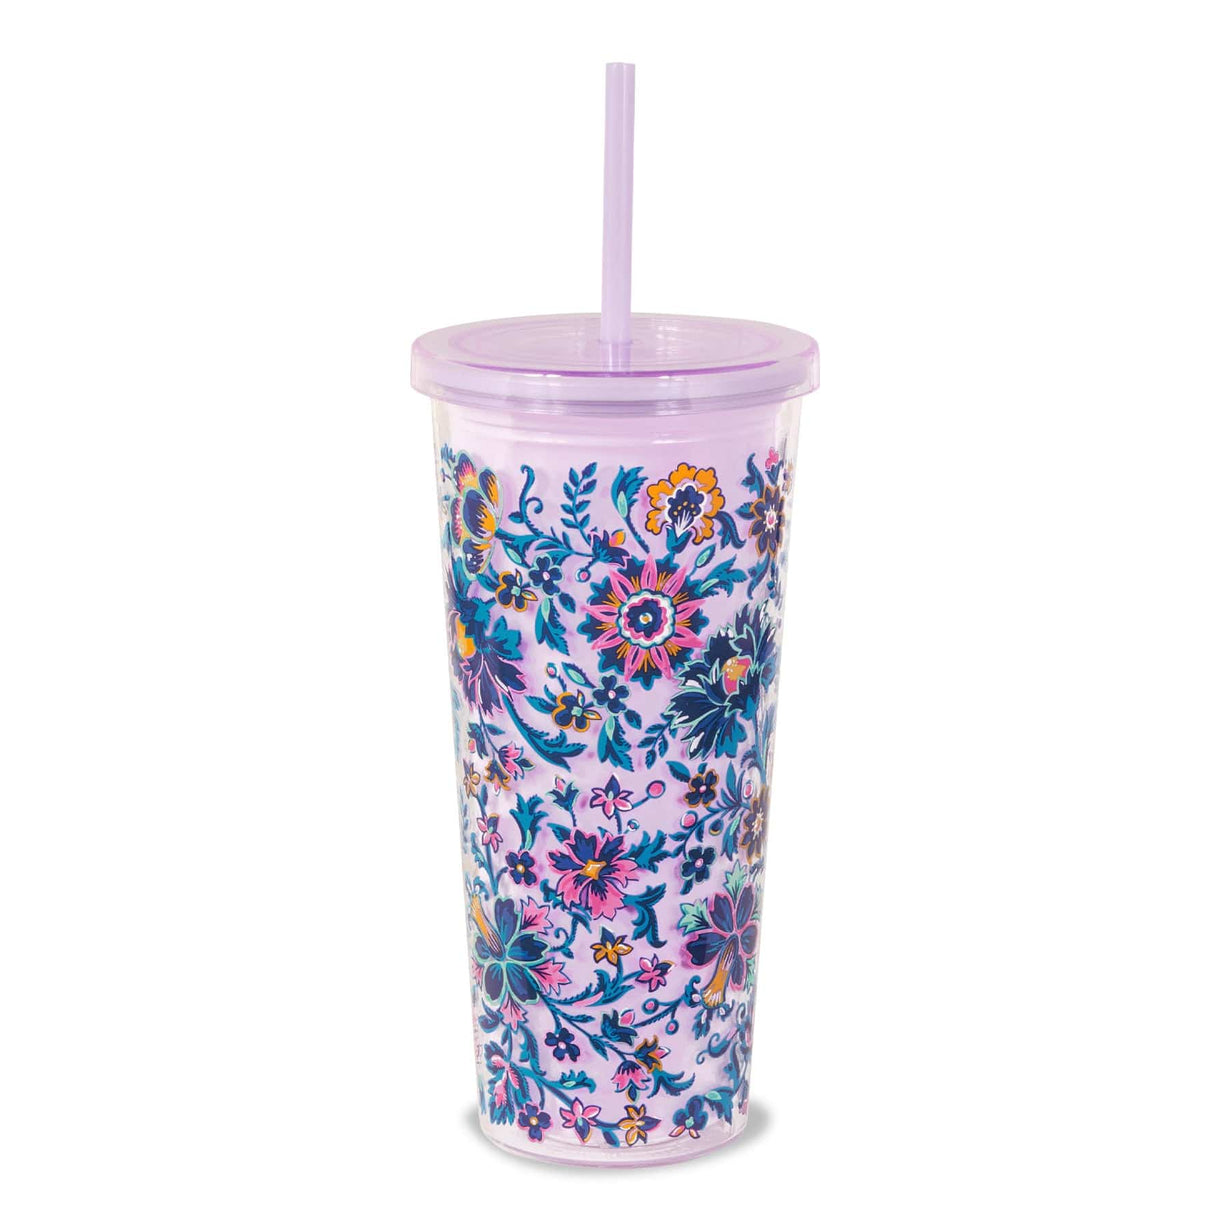 Vera Bradley Double Wall Tumbler with Straw in Fall for Peanuts